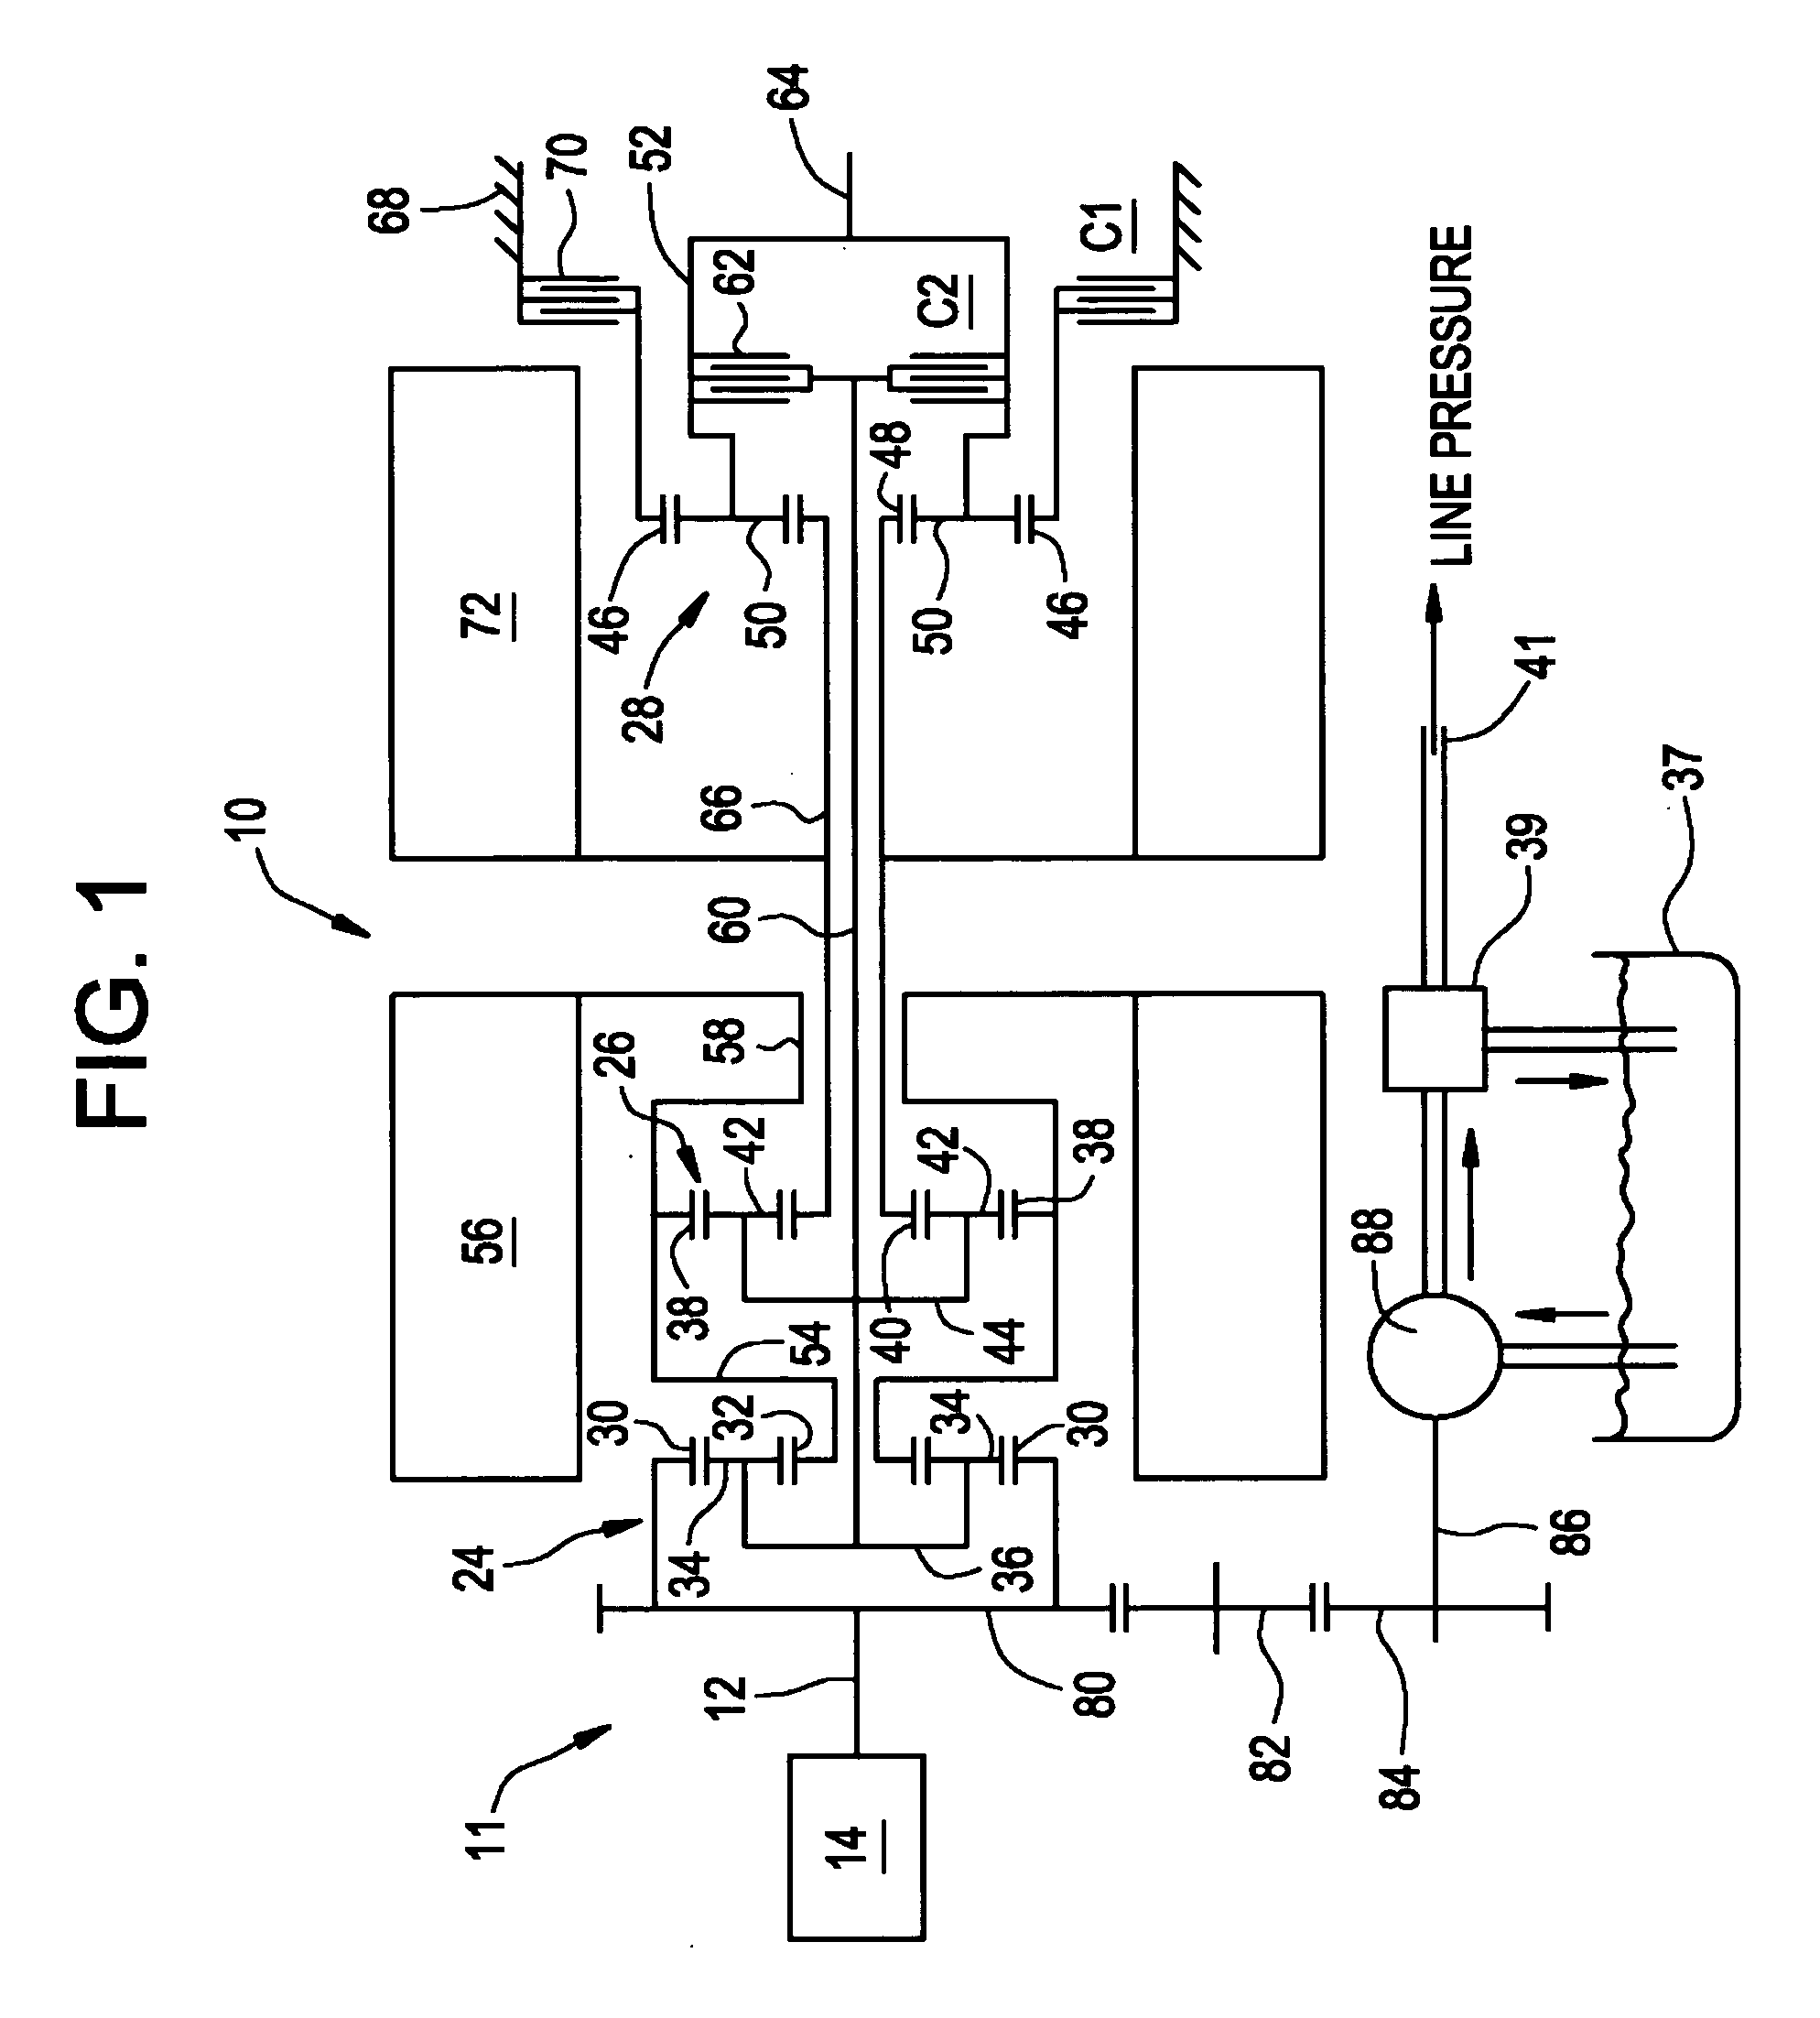 Method of determining battery power limits for an energy storage system of a hybrid electric vehicle